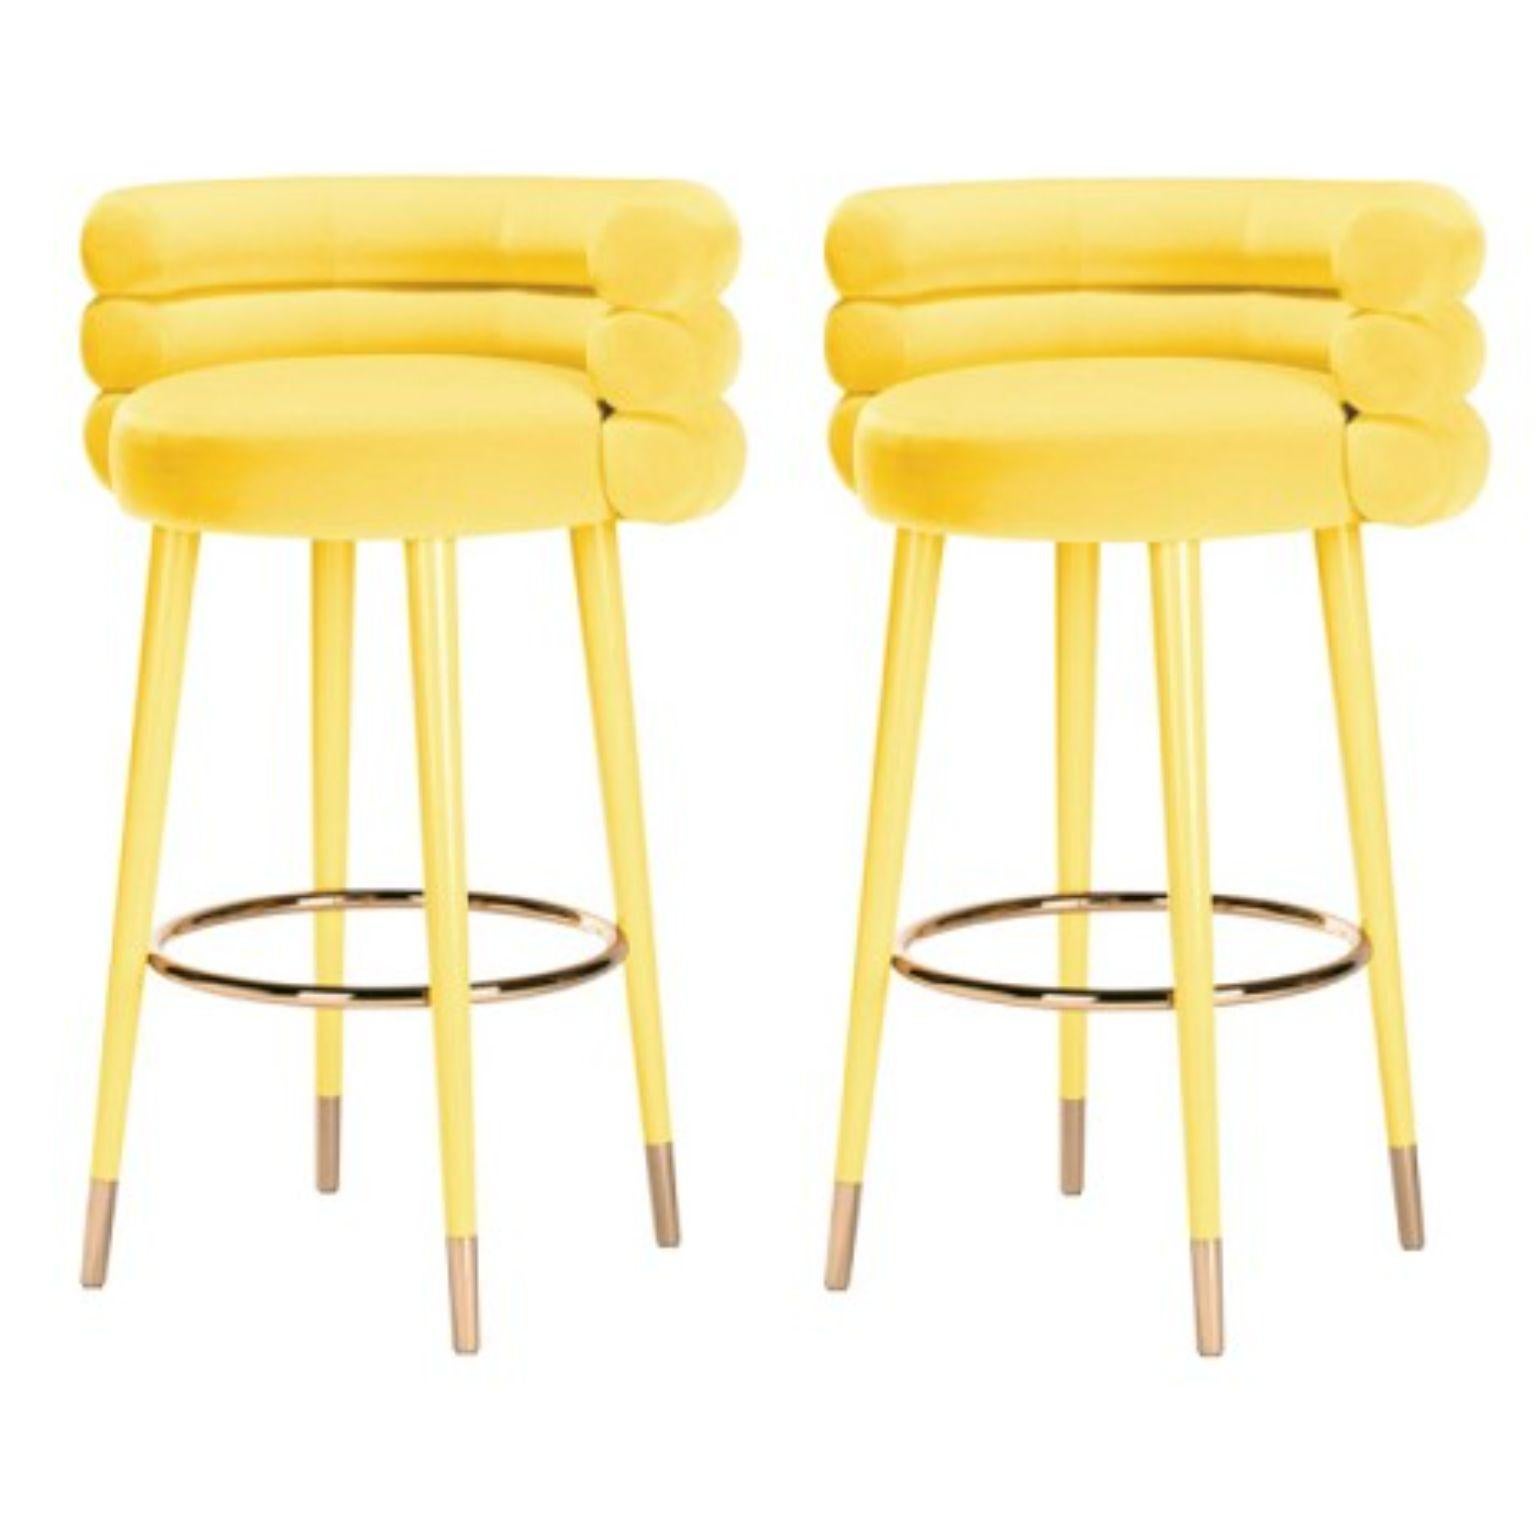 Set of 2 Marshmallow bar stools, royal stranger
Dimensions: 100 x 70 x 60 cm
Materials: Velvet upholstery, brass
Available in: Mint green, light pink, Royal green, Royal red

Royal stranger is an exclusive furniture brand determined to bring